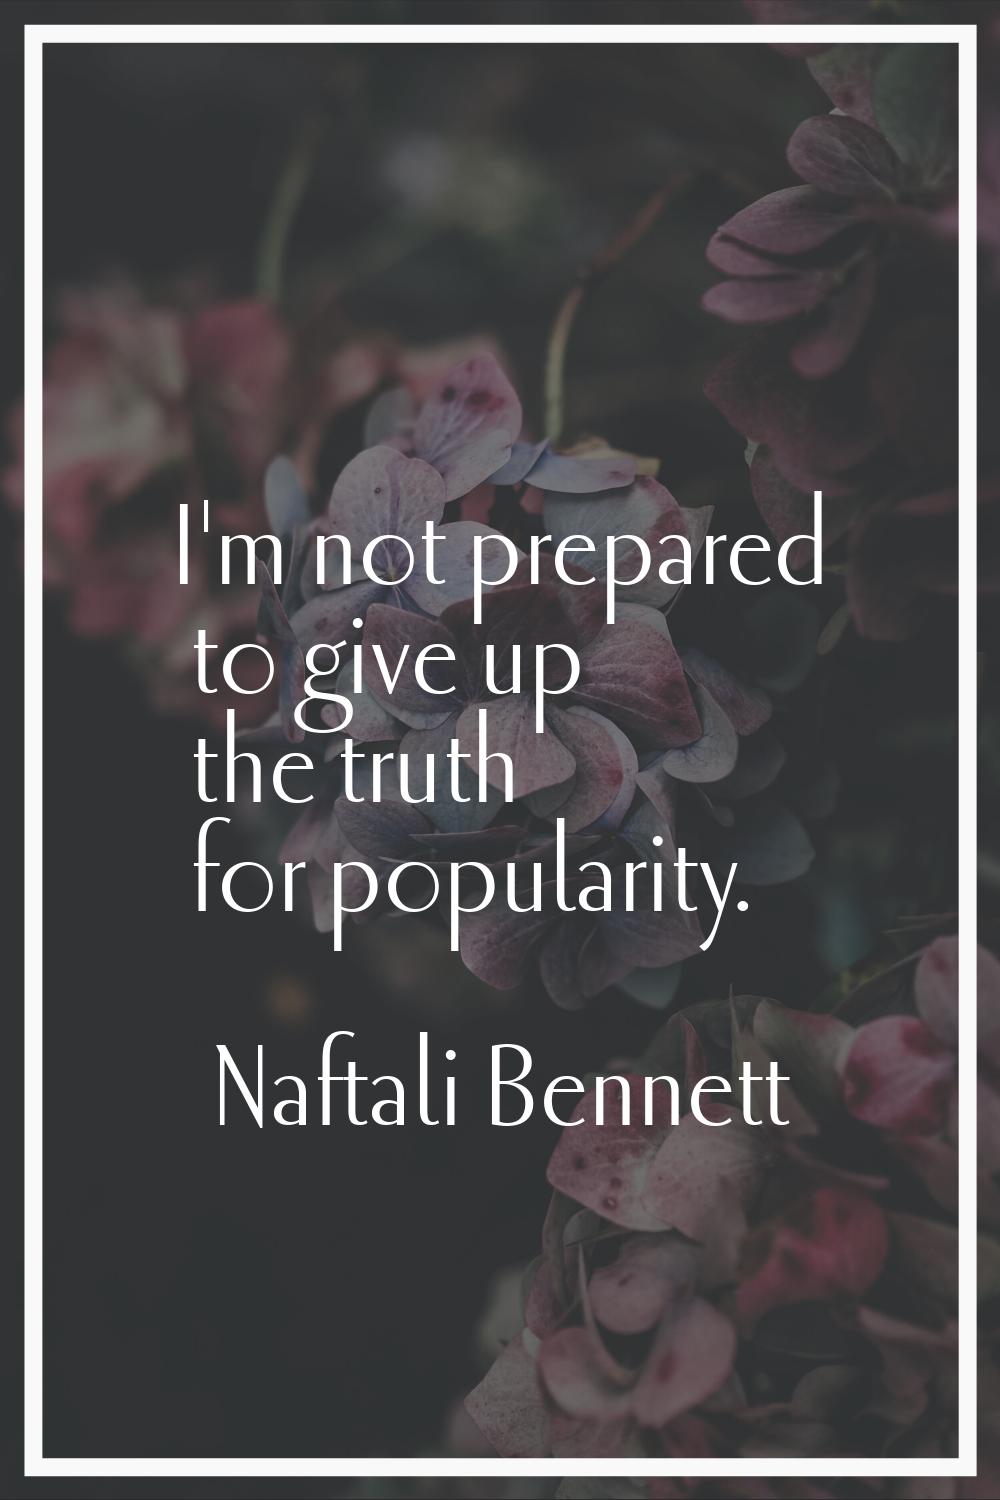 I'm not prepared to give up the truth for popularity.